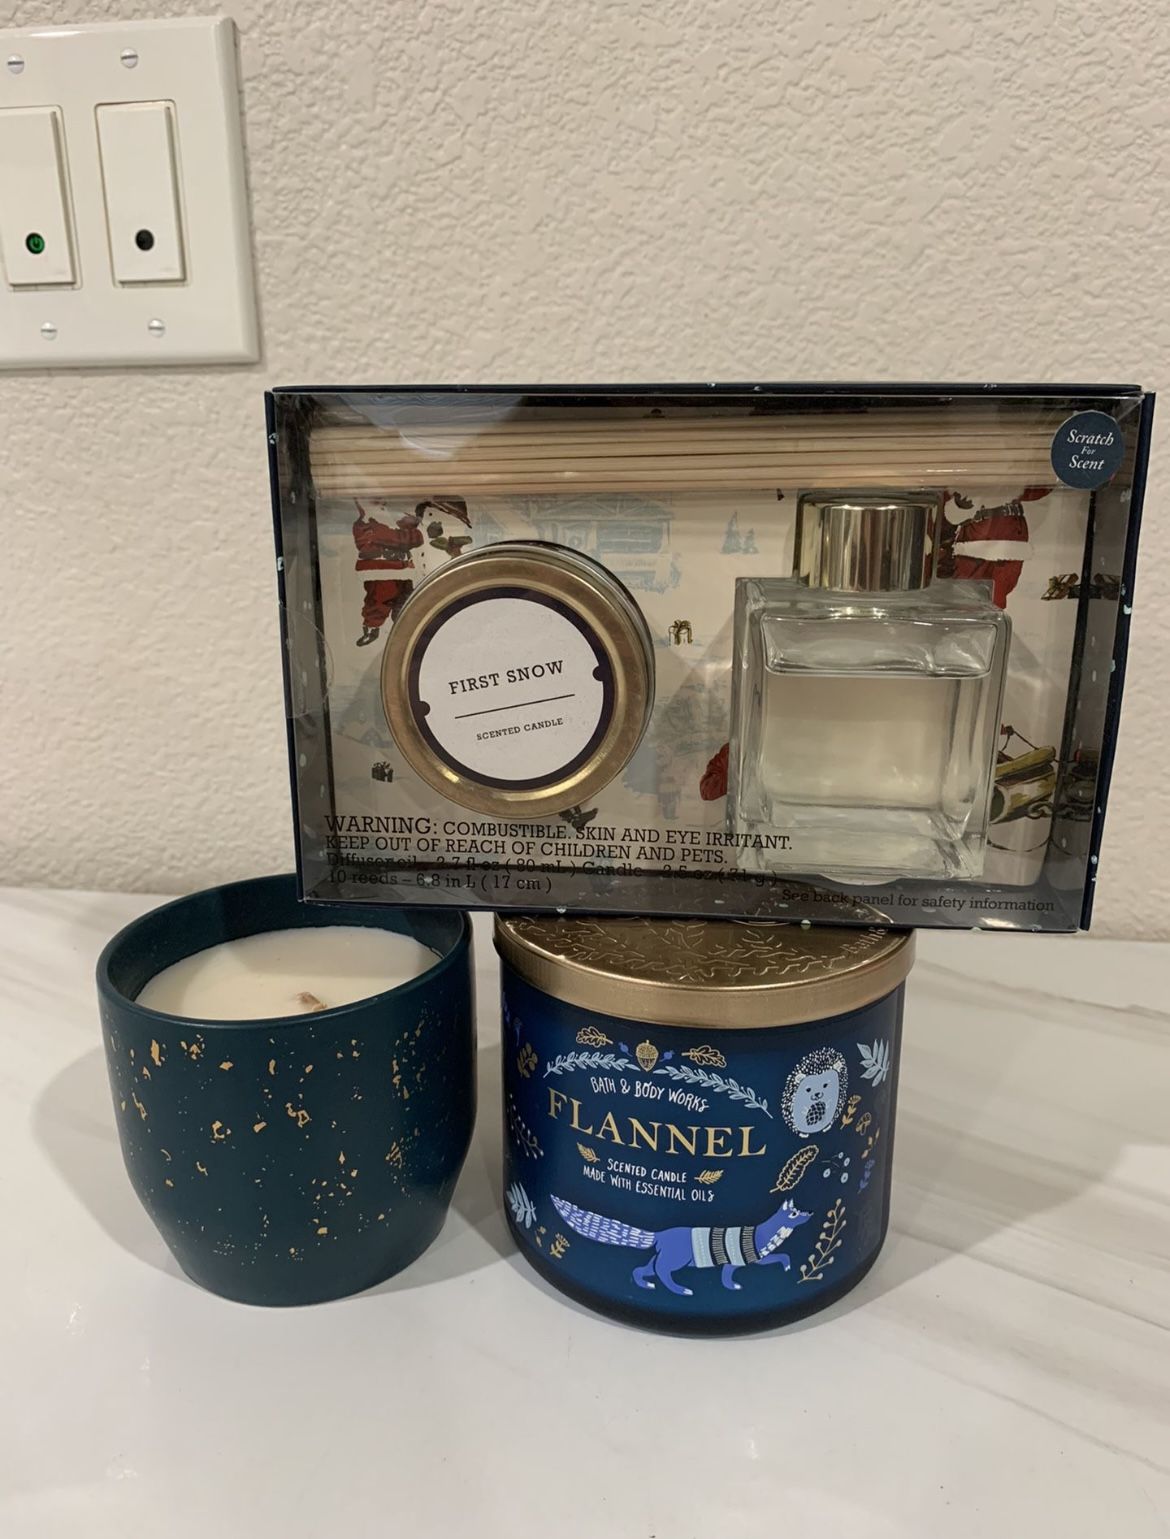 Brand new Holidays Bath & Body Works Candles & Hearth and Hand with Magnolia Candles Bundles